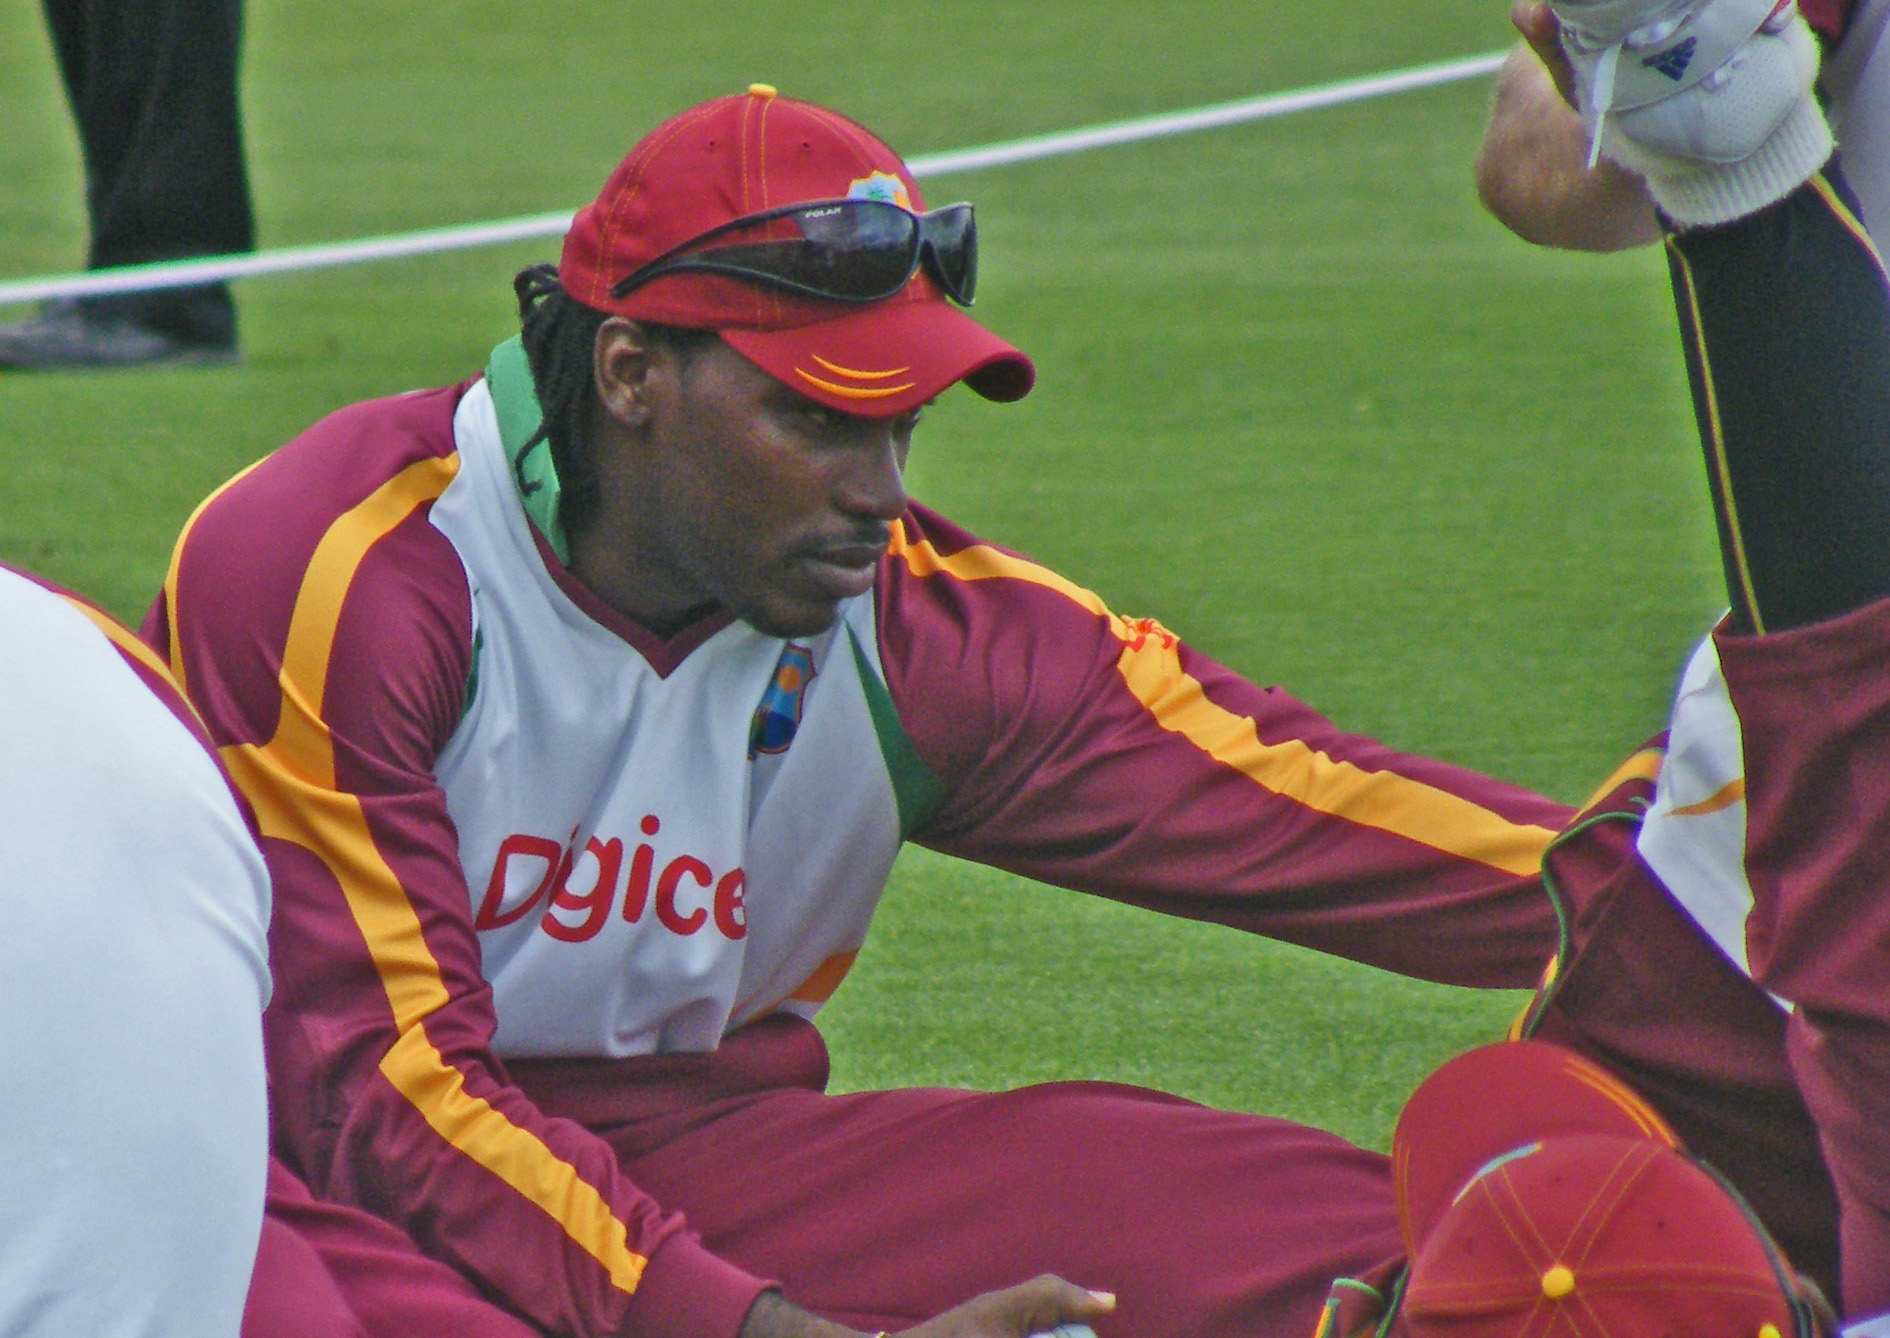 Opponents know what I'm capable of: Chris Gayle